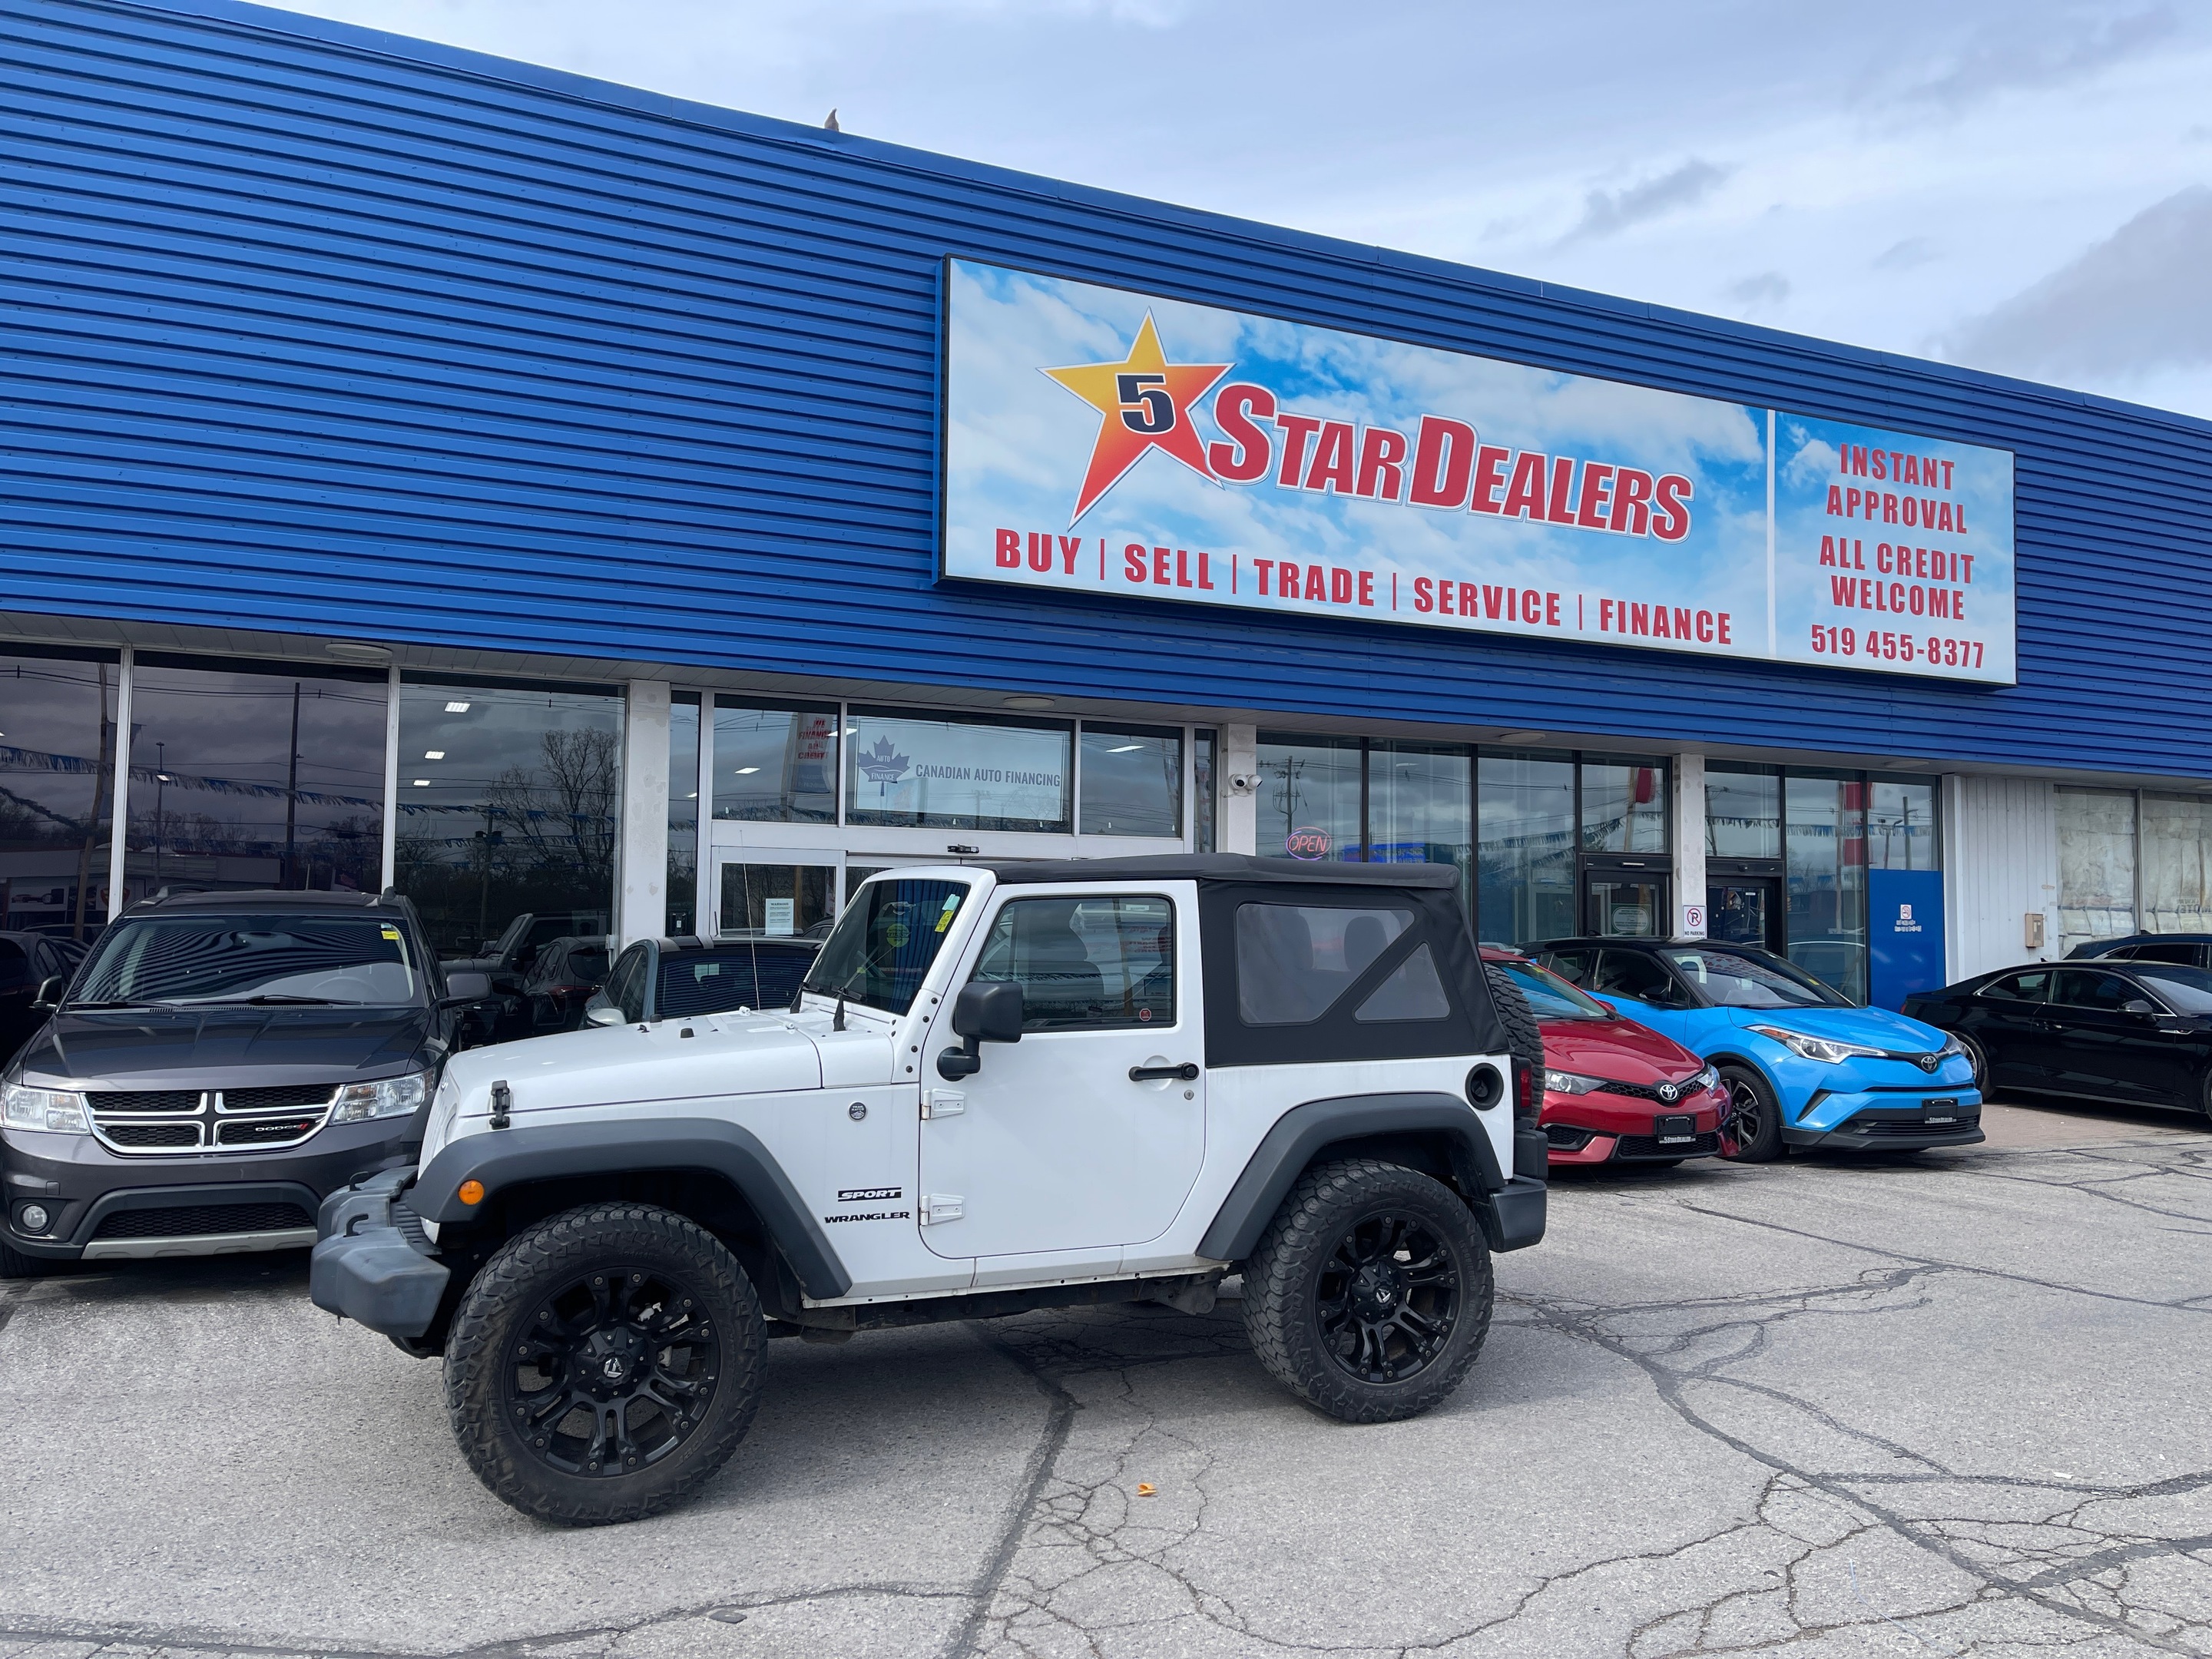 2017 Jeep Wrangler EXCELLENT CONDITION LOADED! WE FINANCE ALL CREDIT